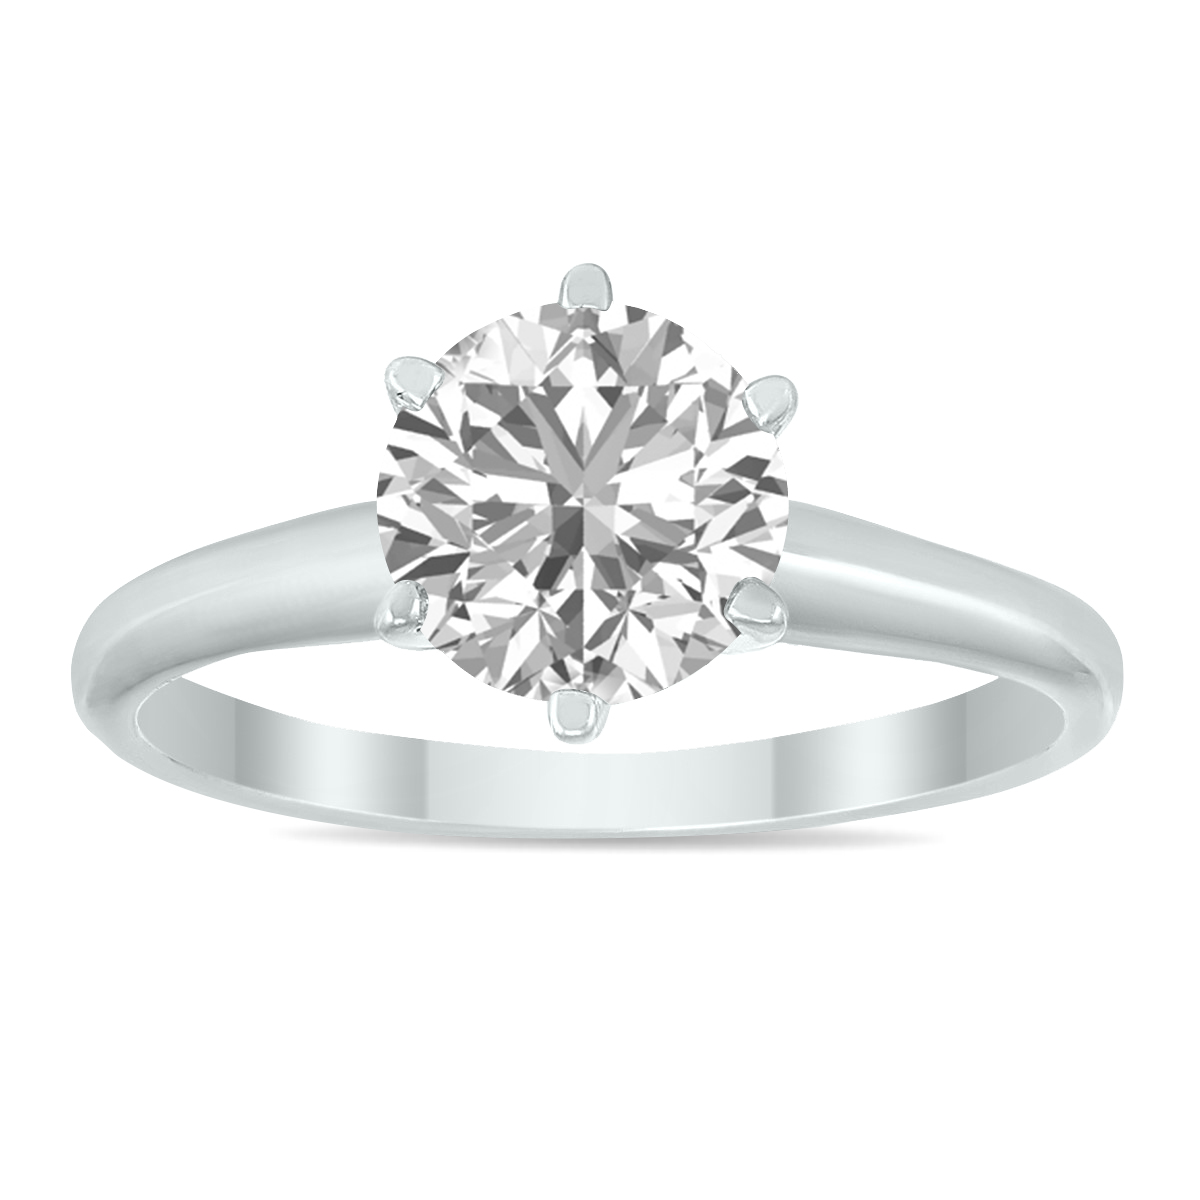 Image of IGI Certified Lab Grown 1 1/10 Carat Diamond Solitaire Ring in 14K White Gold (J Color VS2 Clarity)